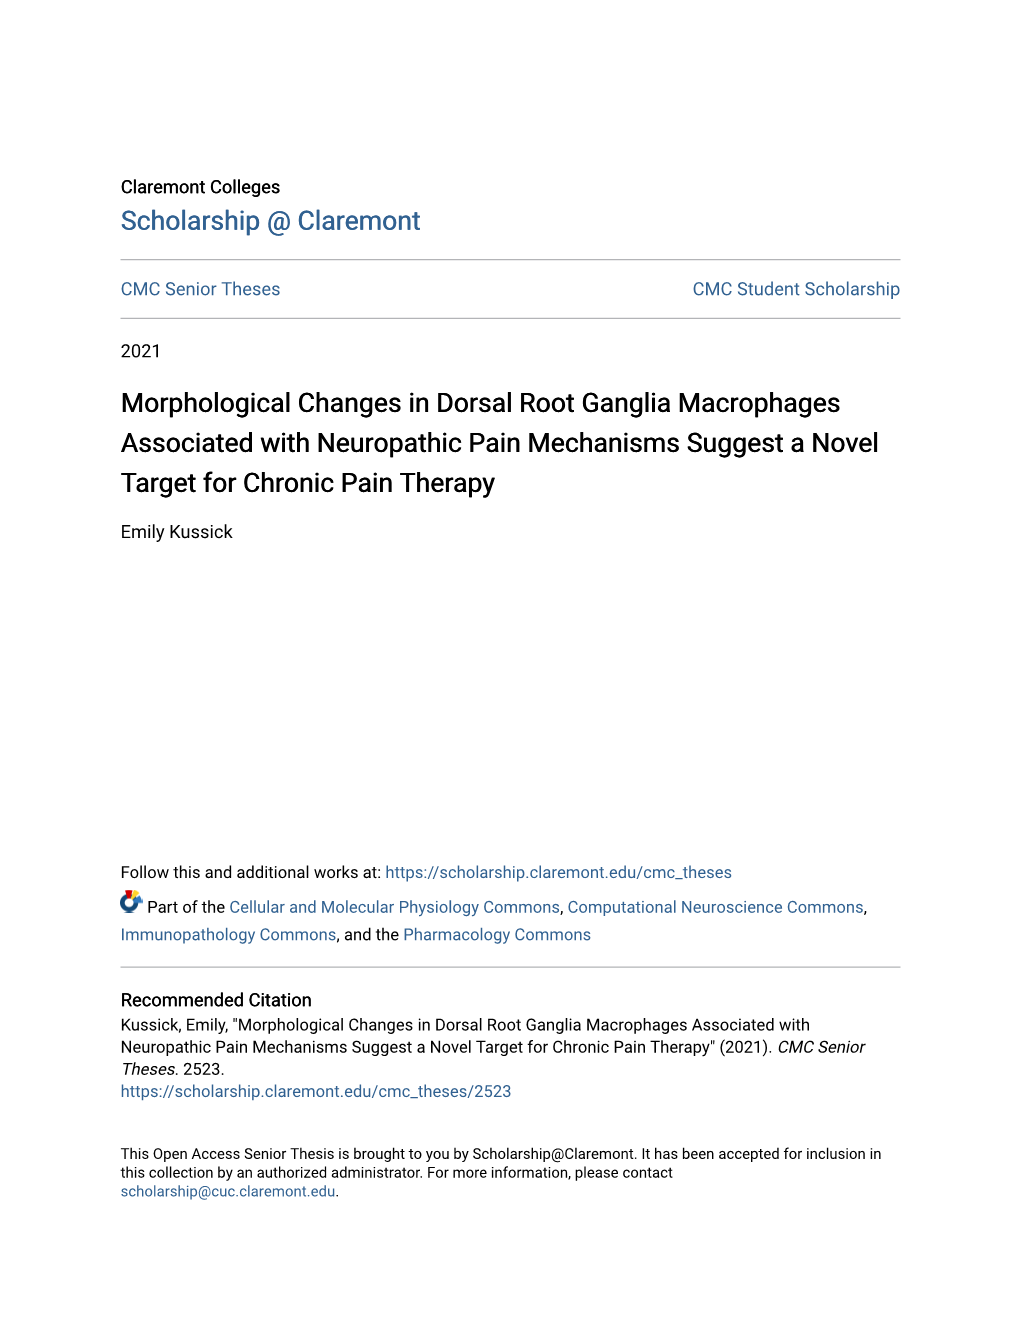 Morphological Changes in Dorsal Root Ganglia Macrophages Associated with Neuropathic Pain Mechanisms Suggest a Novel Target for Chronic Pain Therapy